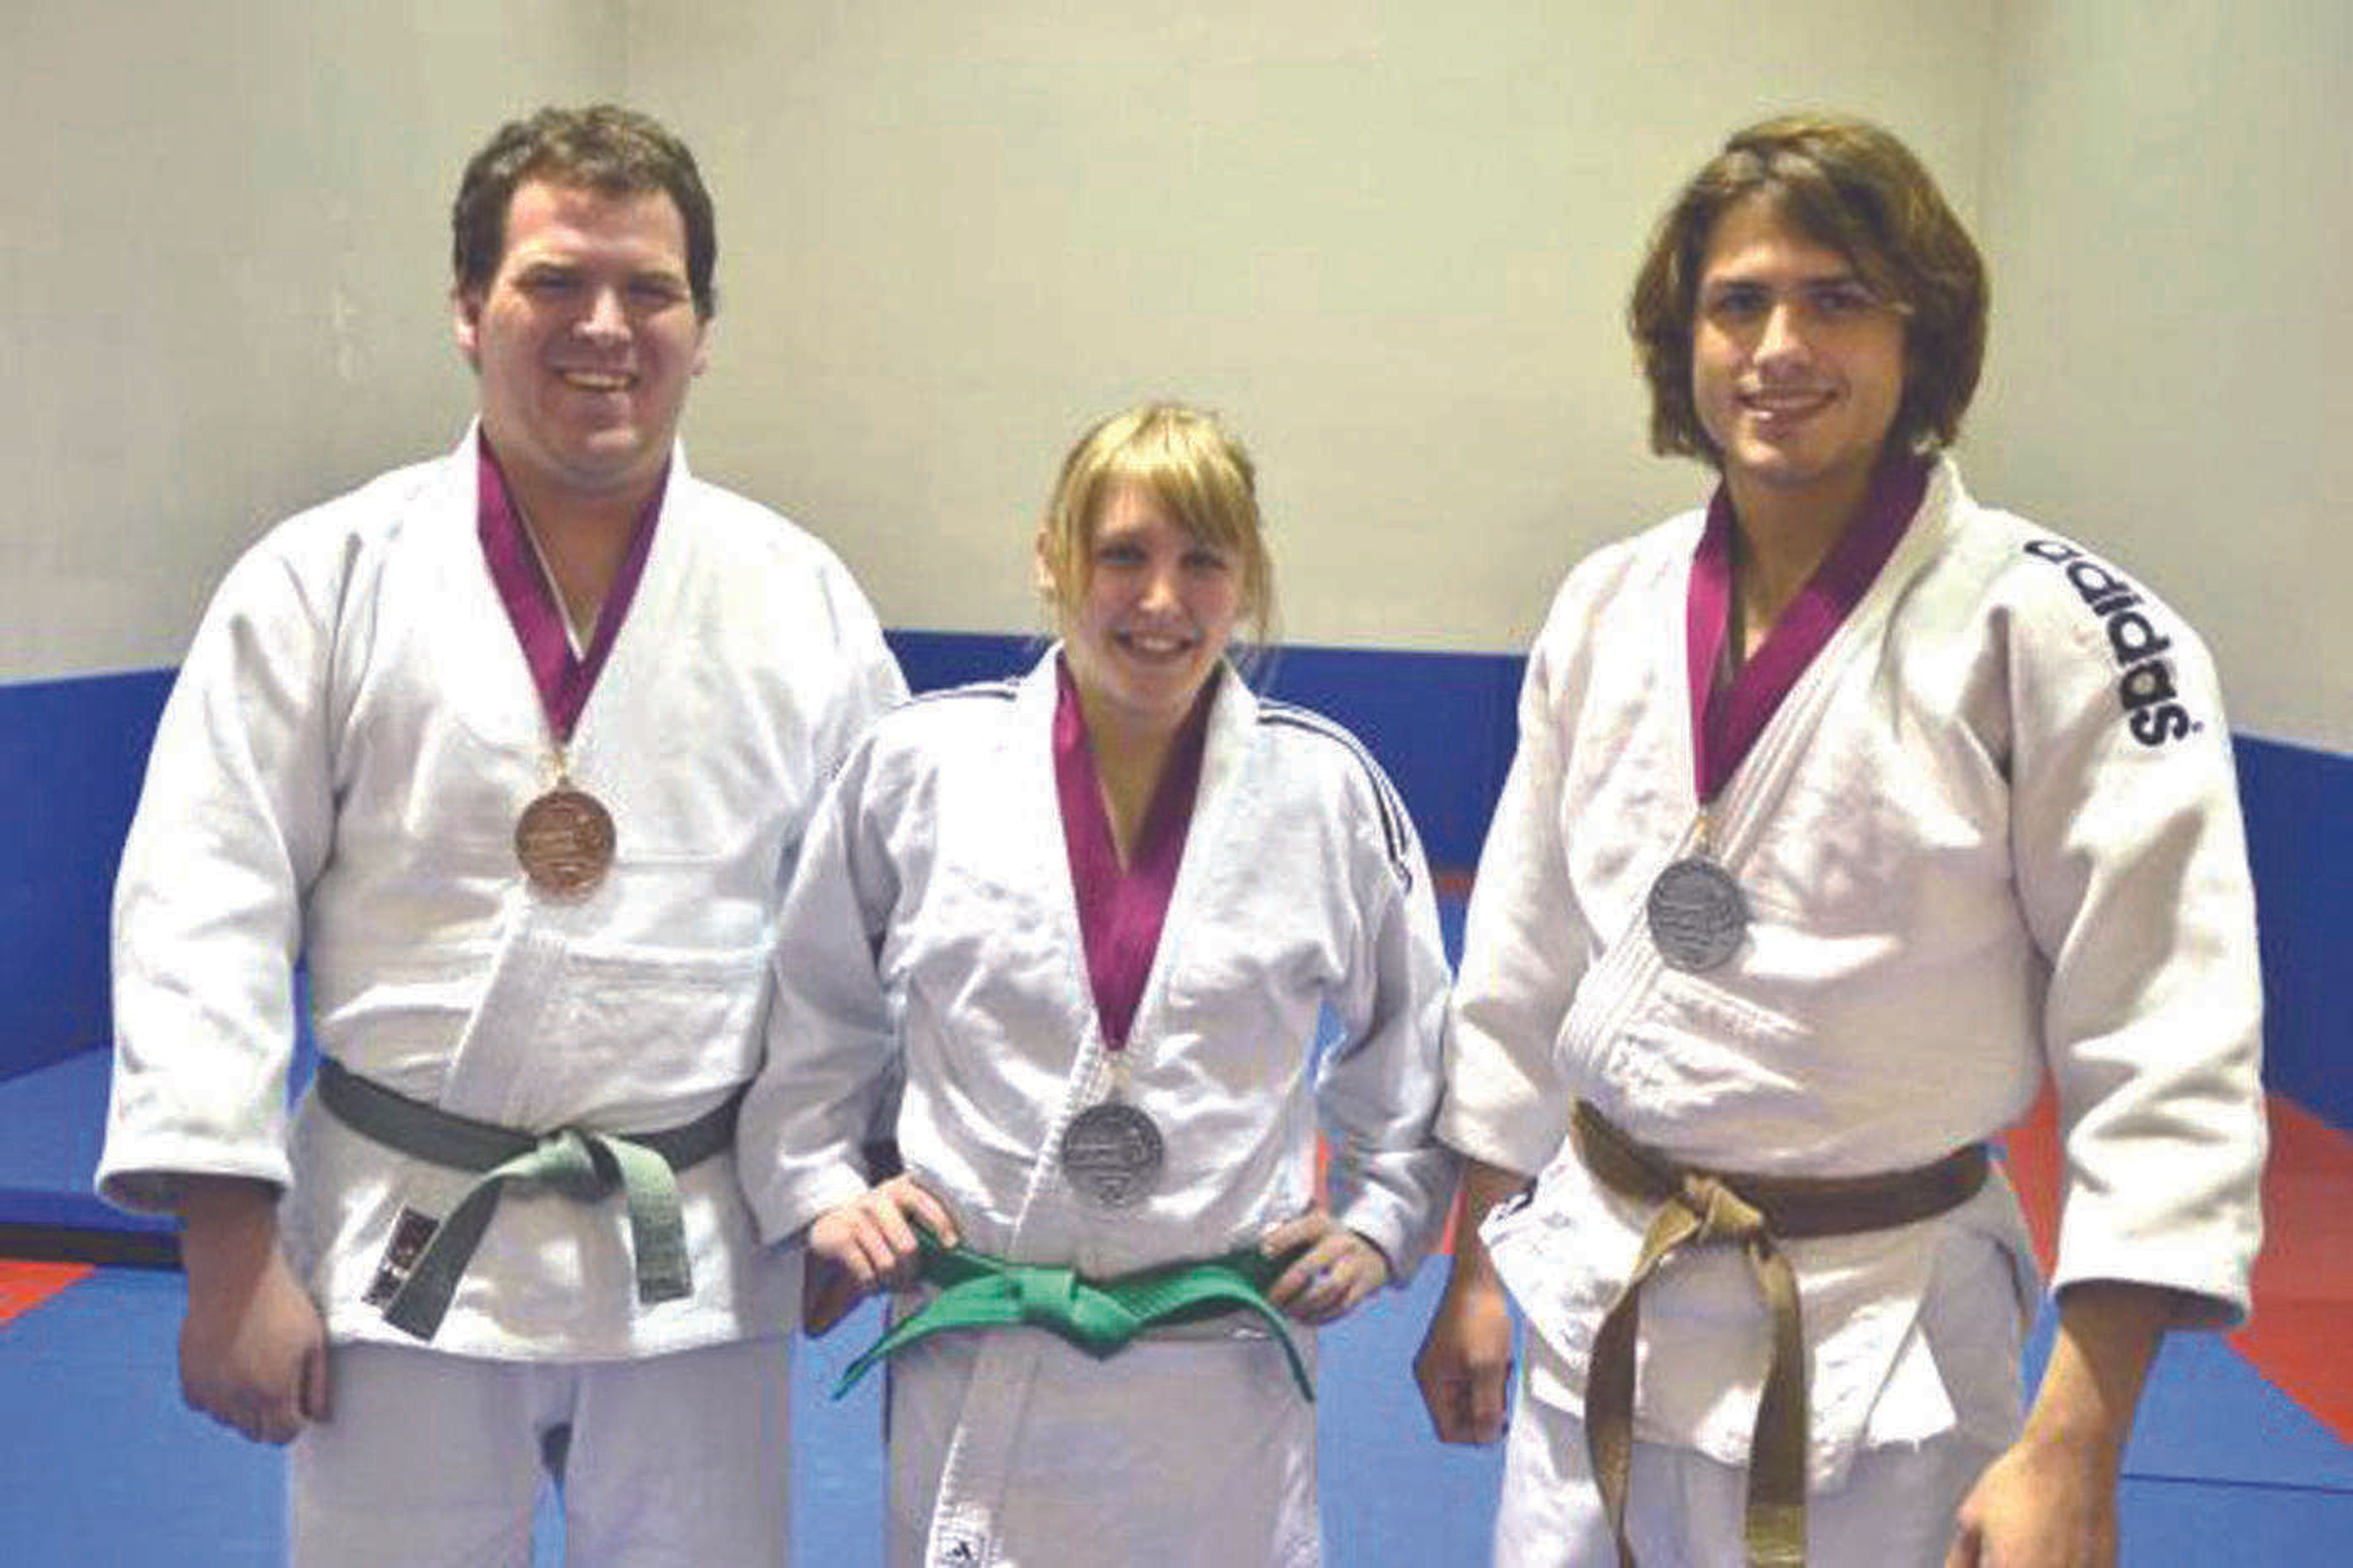 Southeast judo club ranks third in the nation after wins at championship